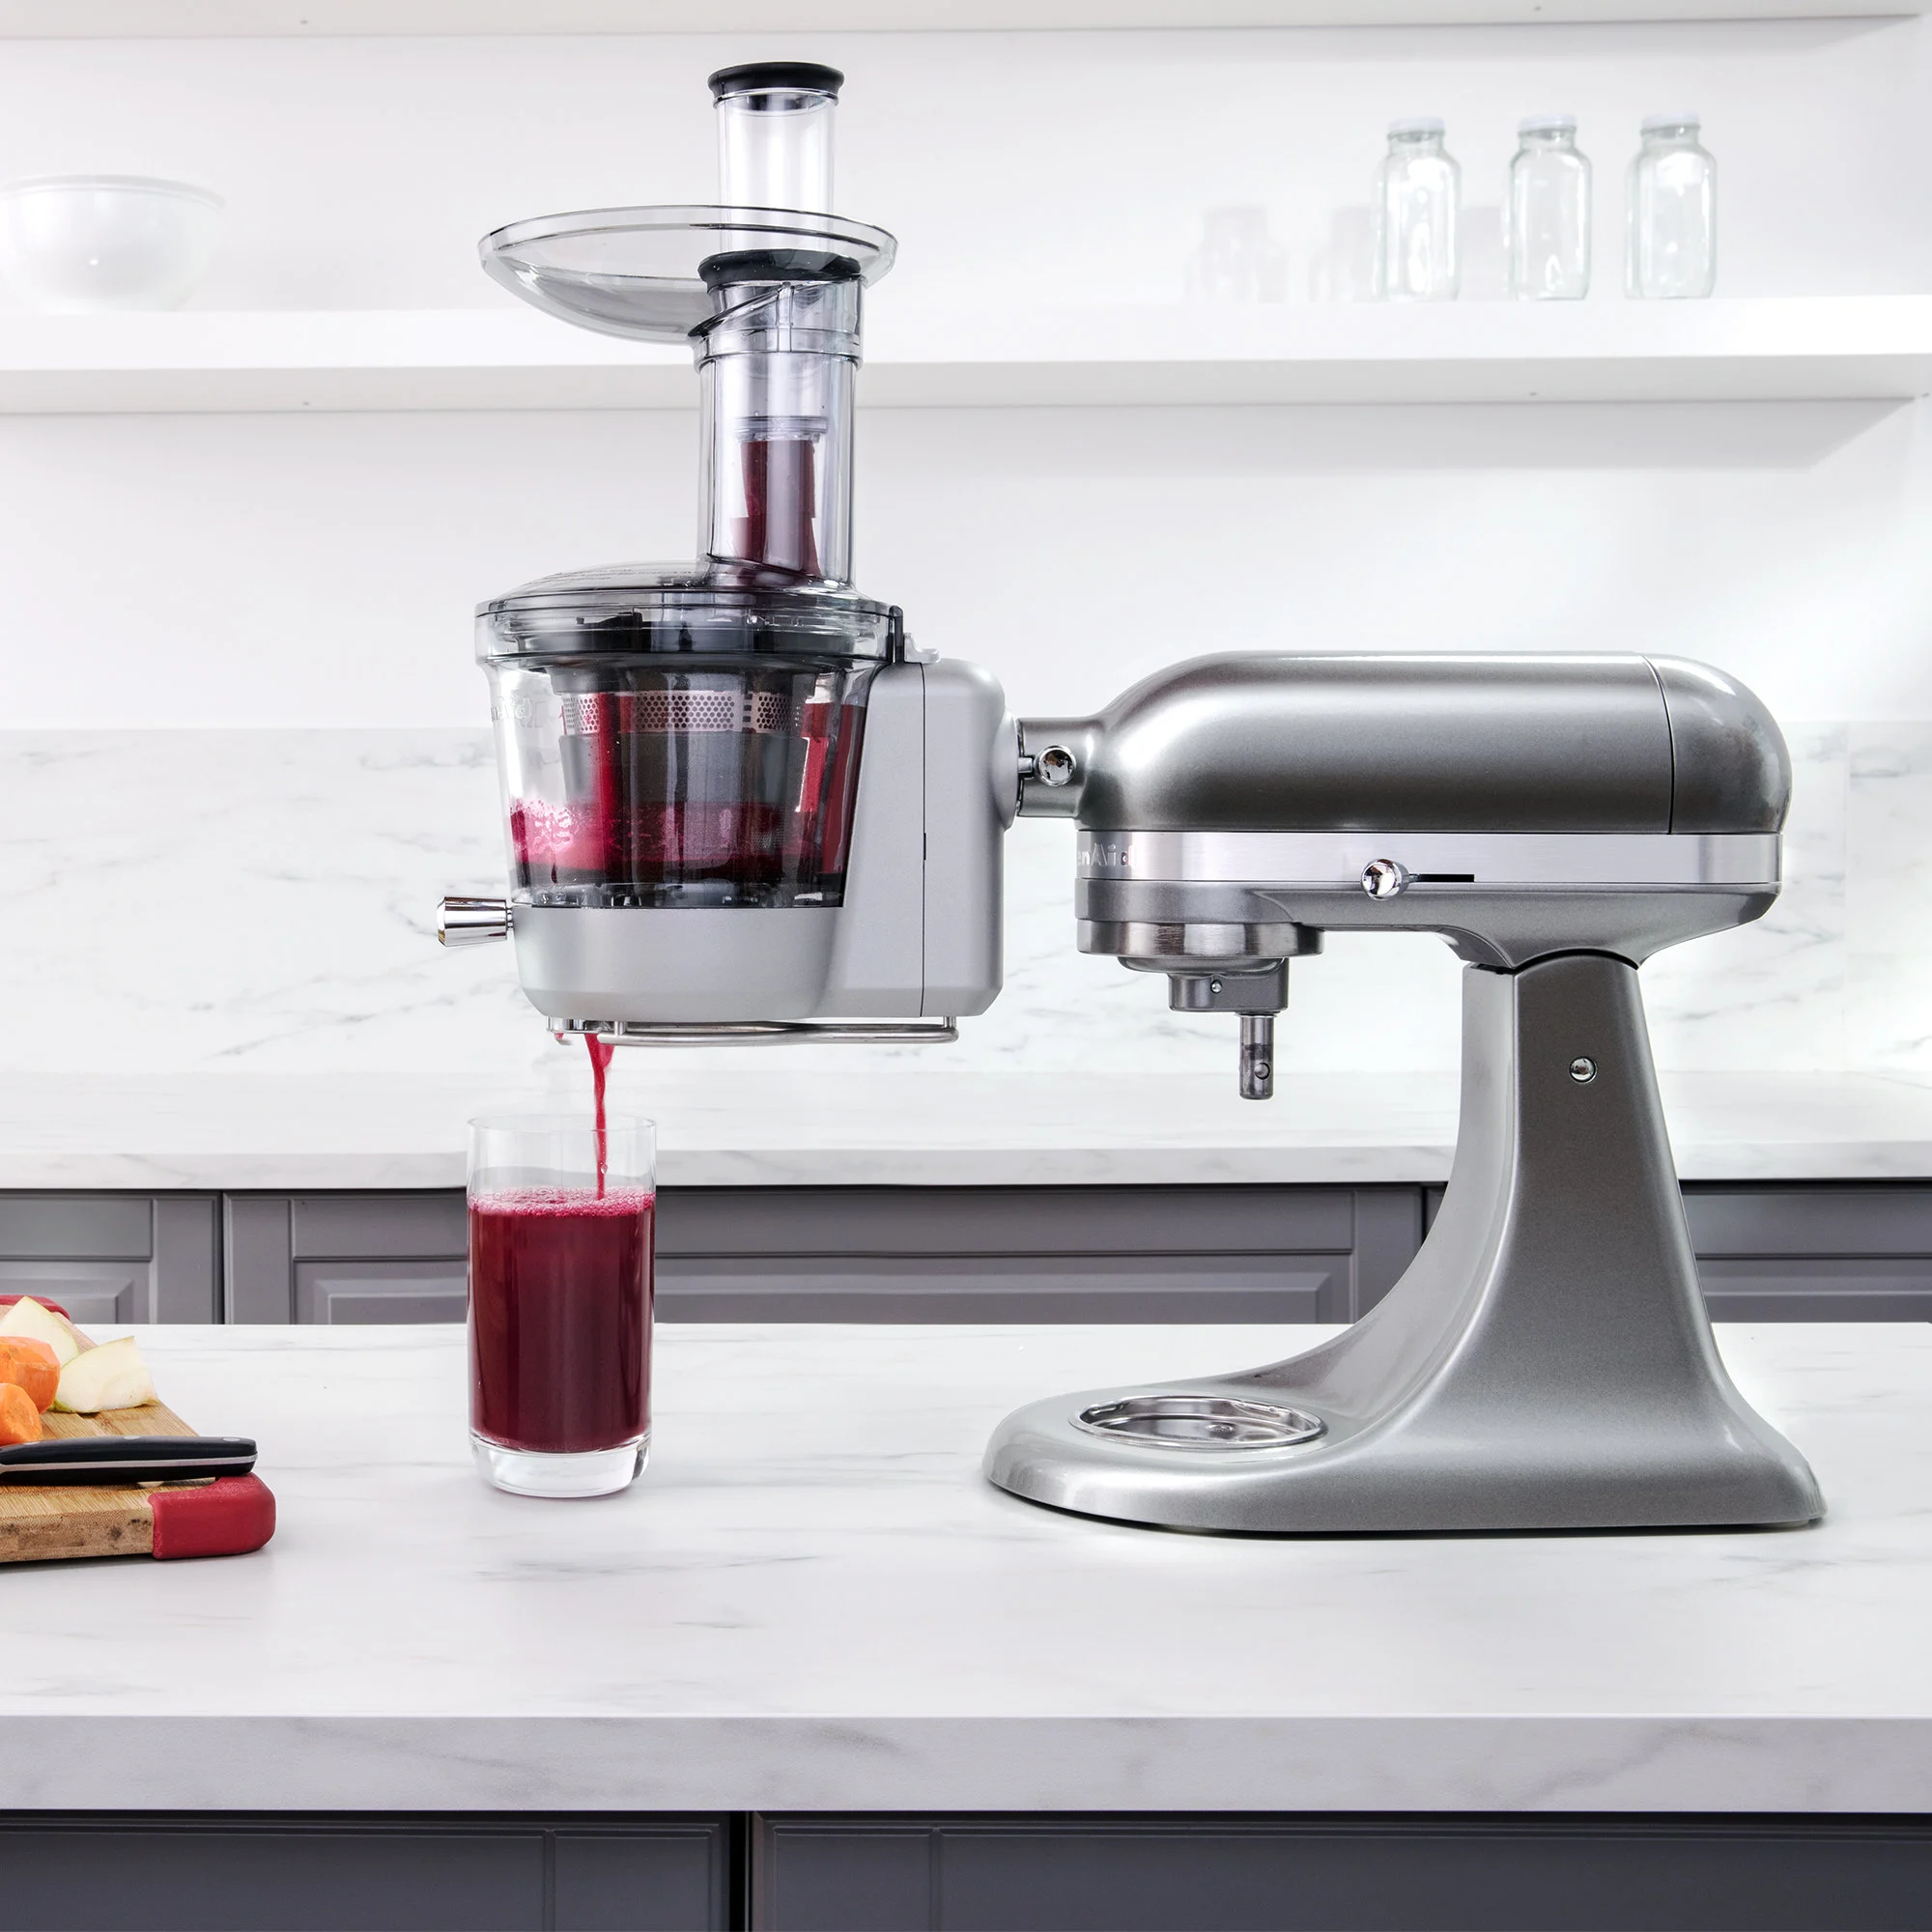 How To Use A Kitchenaid Juicer Attachment